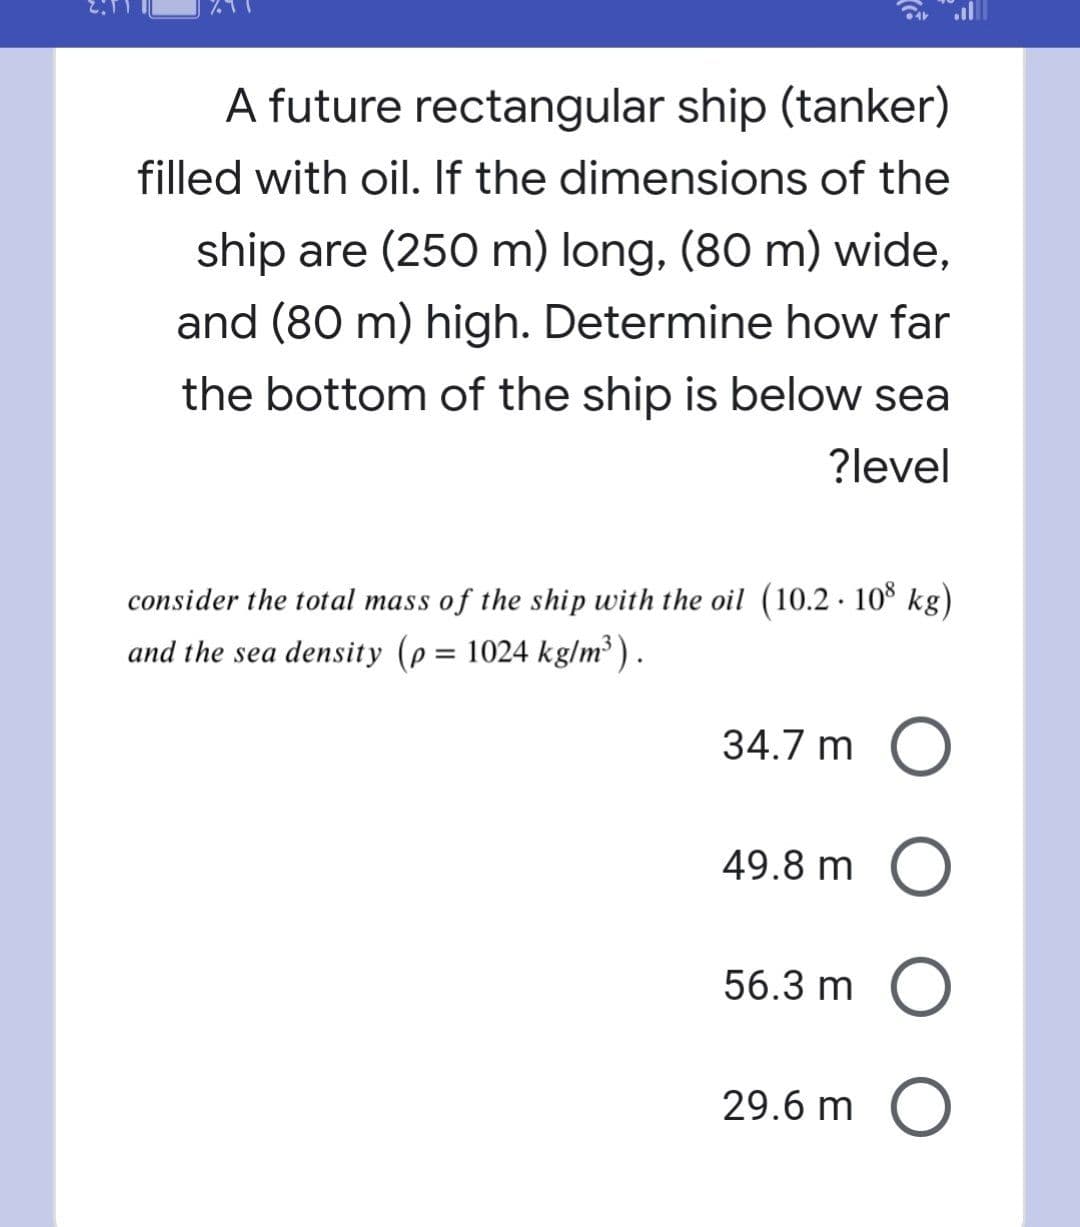 A future rectangular ship (tanker)
filled with oil. If the dimensions of the
ship are (250 m) long, (80 m) wide,
and (80 m) high. Determine how far
the bottom of the ship is below sea
?level
consider the total mass of the ship with the oil (10.2 · 10% kg)
and the sea density (p = 1024 kg/m³ ).
%3D
34.7 m O
49.8 m O
56.3 m O
29.6 m O
